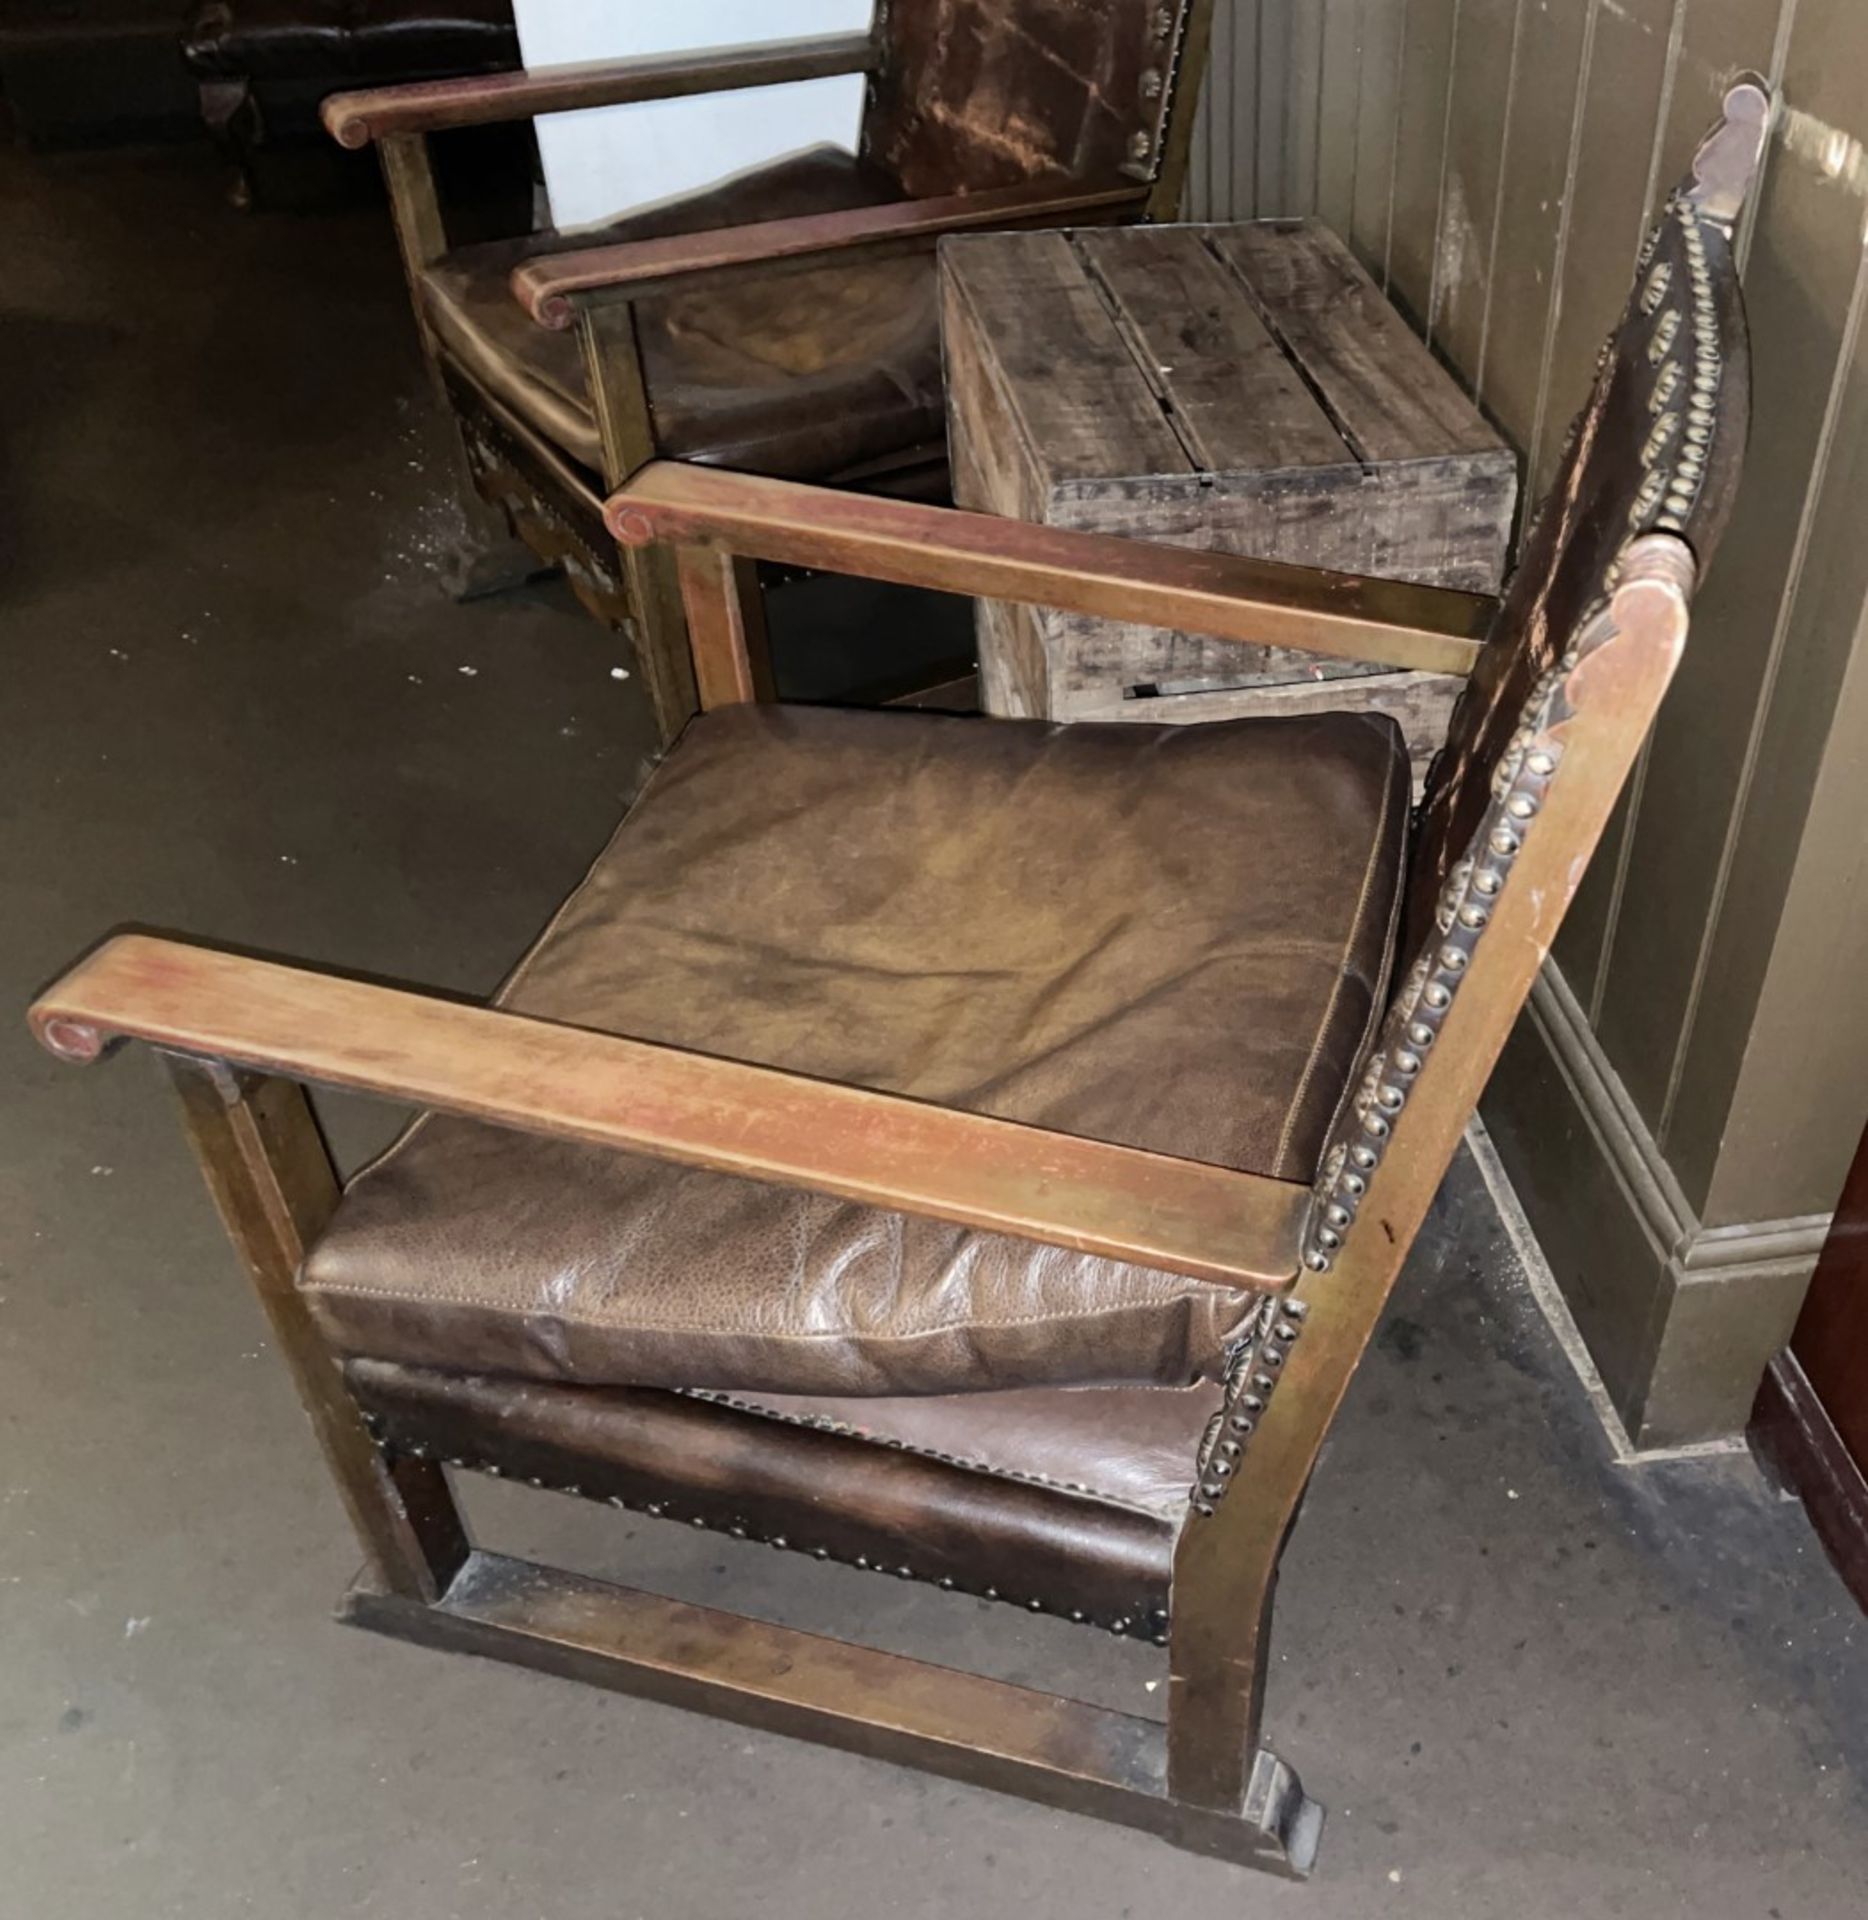 2 x Antique Gothic Revival Heavy Brown Leather Upholstered Wooden Armchairs, and Soap Box - Image 5 of 10